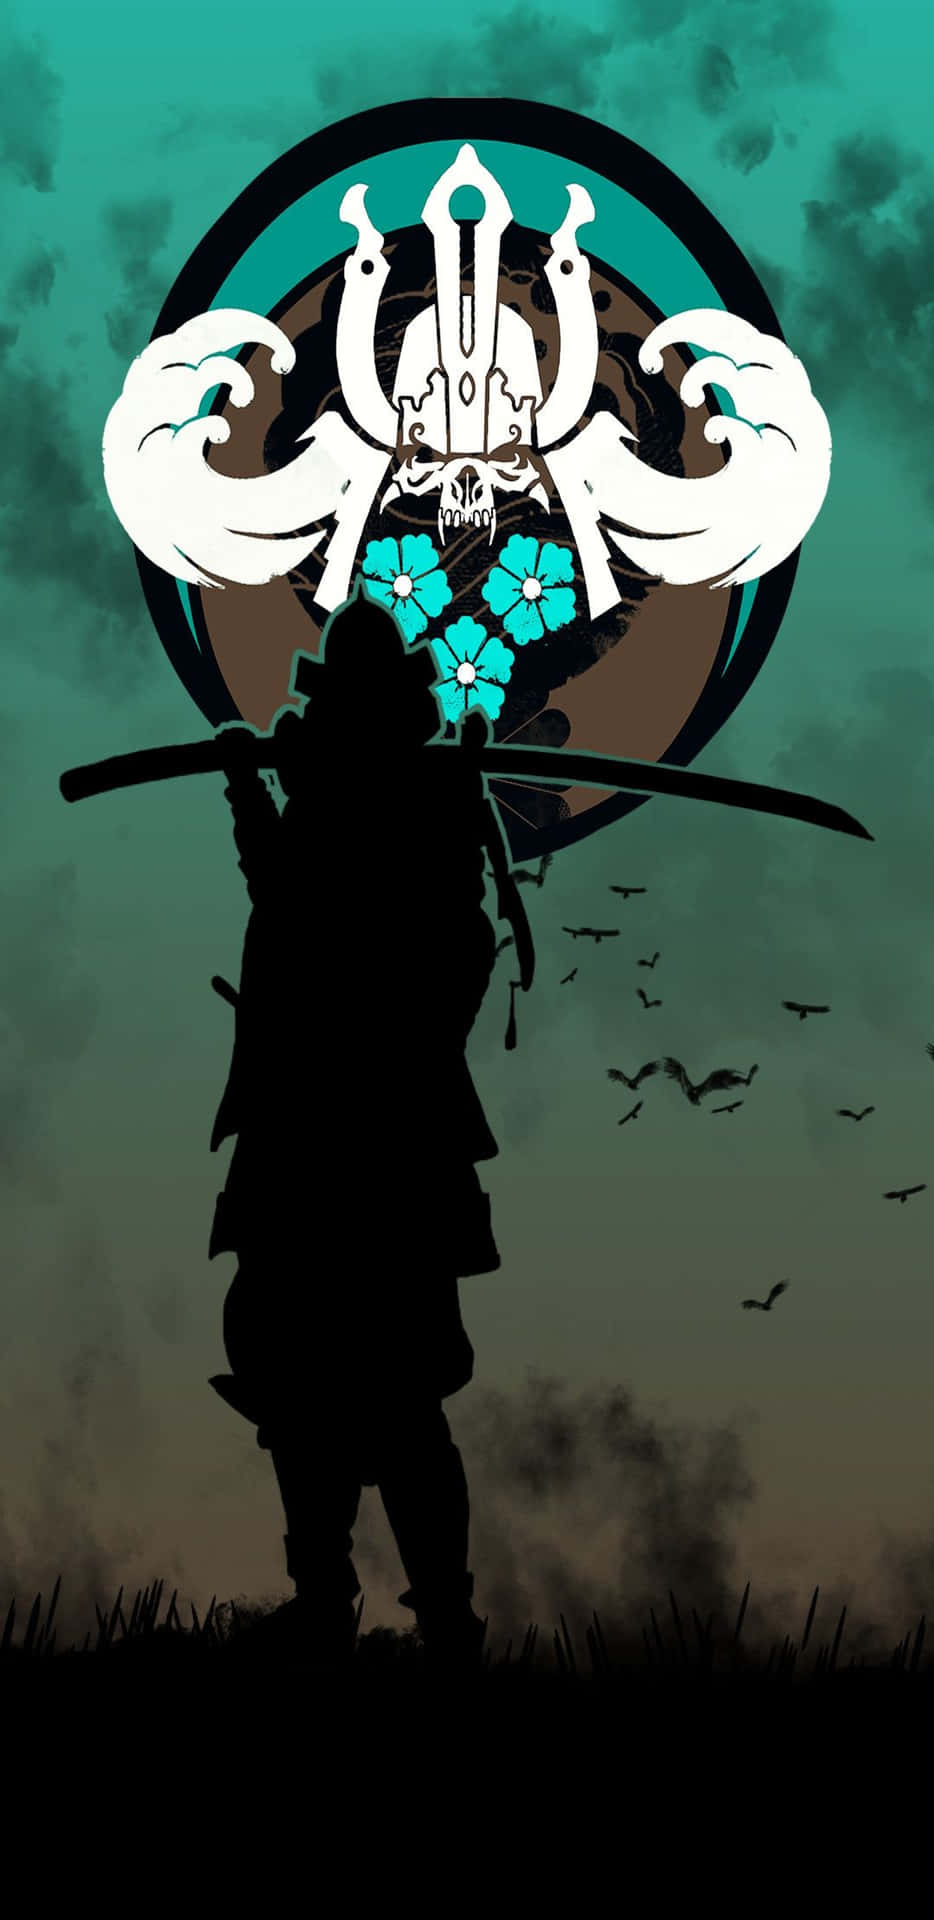 Pixel 3xl For Honor Kensei Background